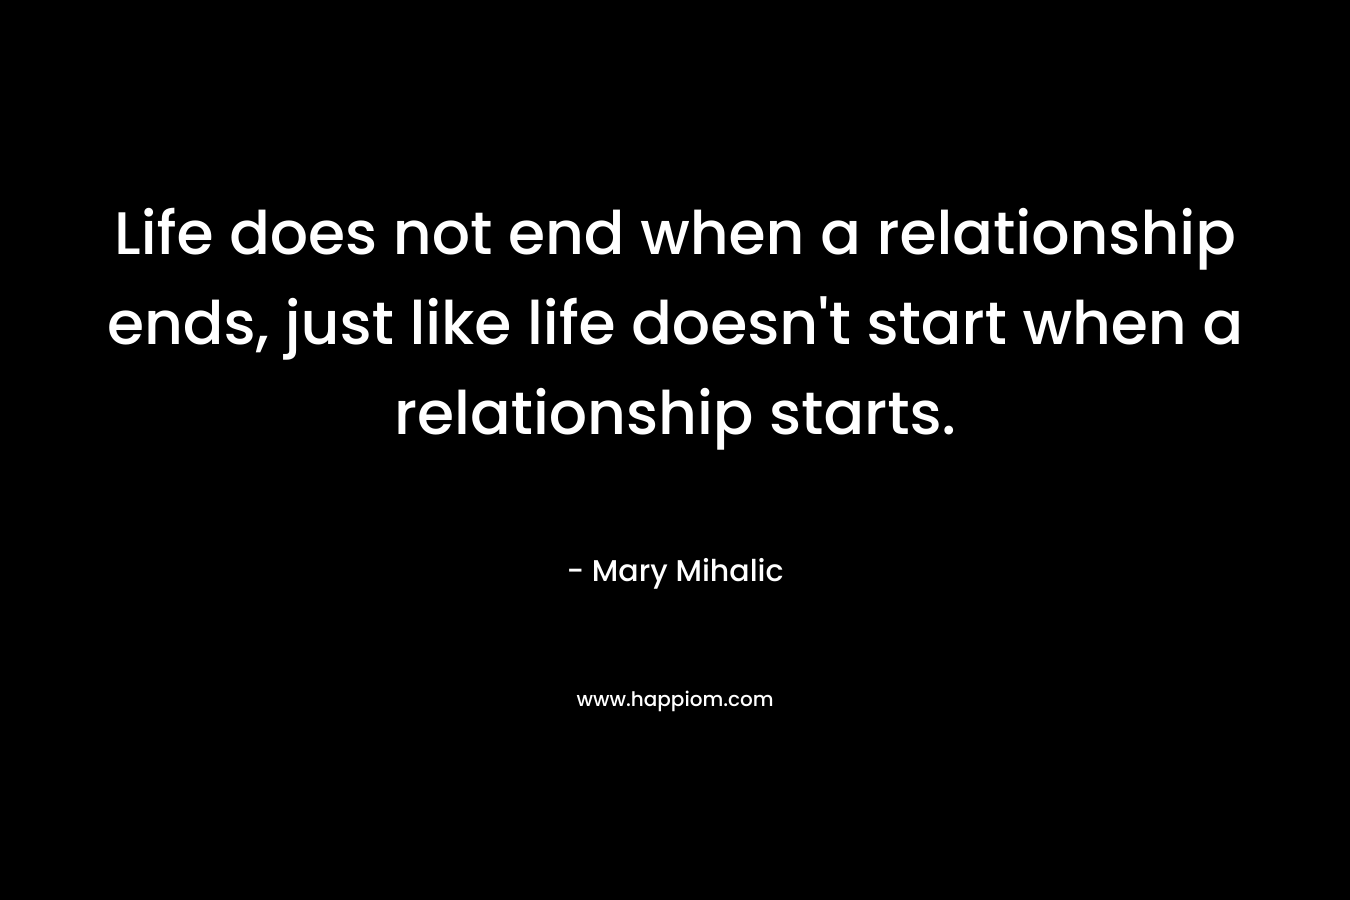 Life does not end when a relationship ends, just like life doesn't start when a relationship starts.